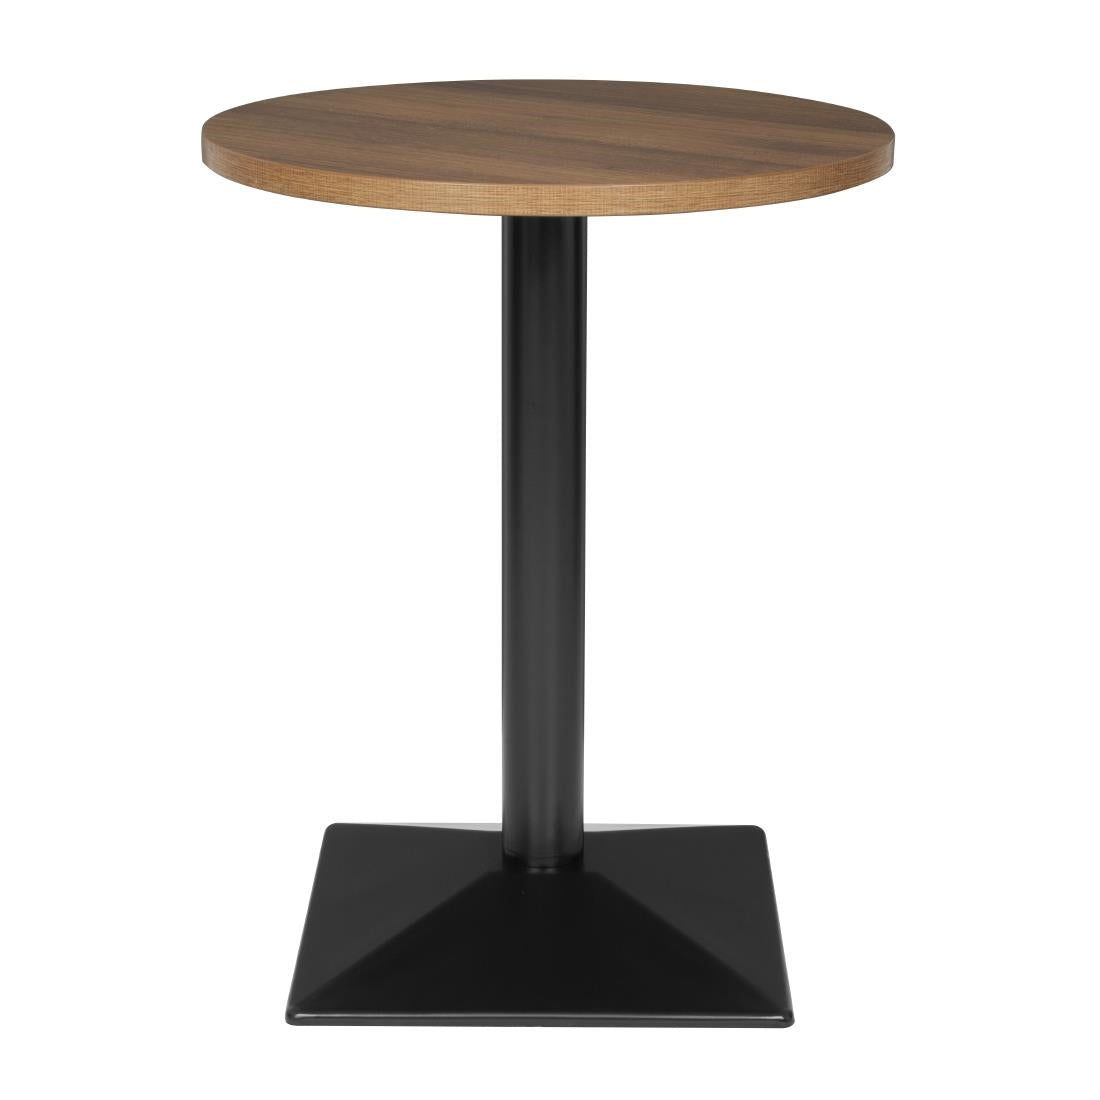 CH993 Bolero Complete Round Table 600mm JD Catering Equipment Solutions Ltd